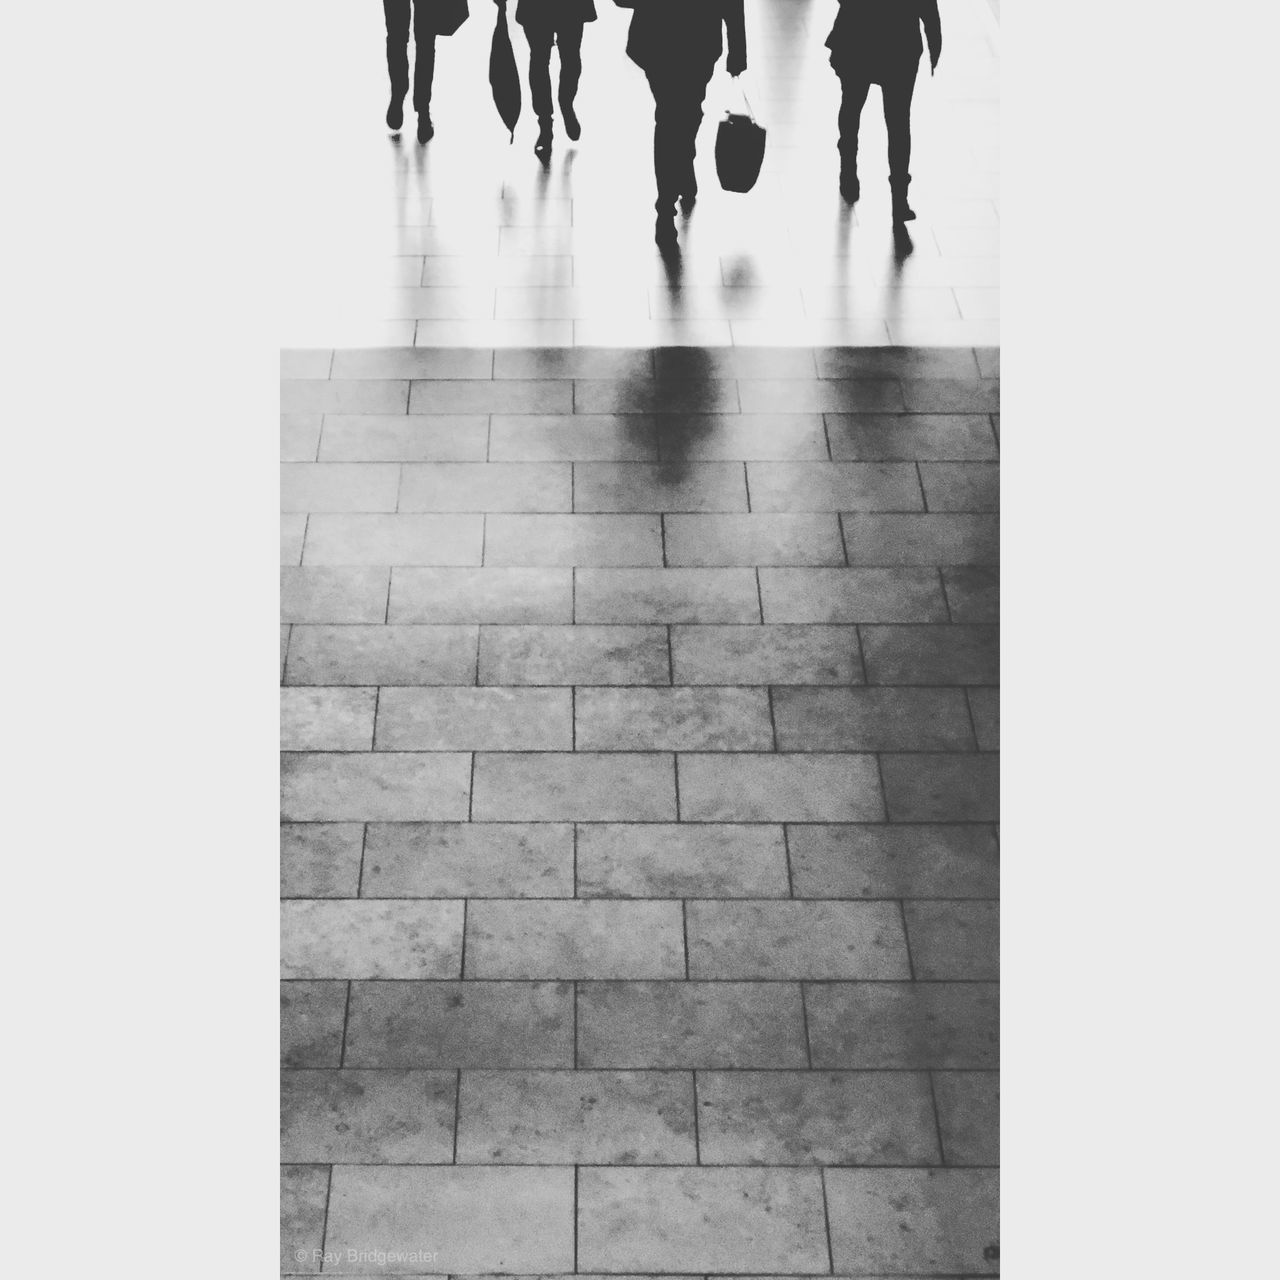 LOW SECTION OF PEOPLE WALKING ON FLOORING